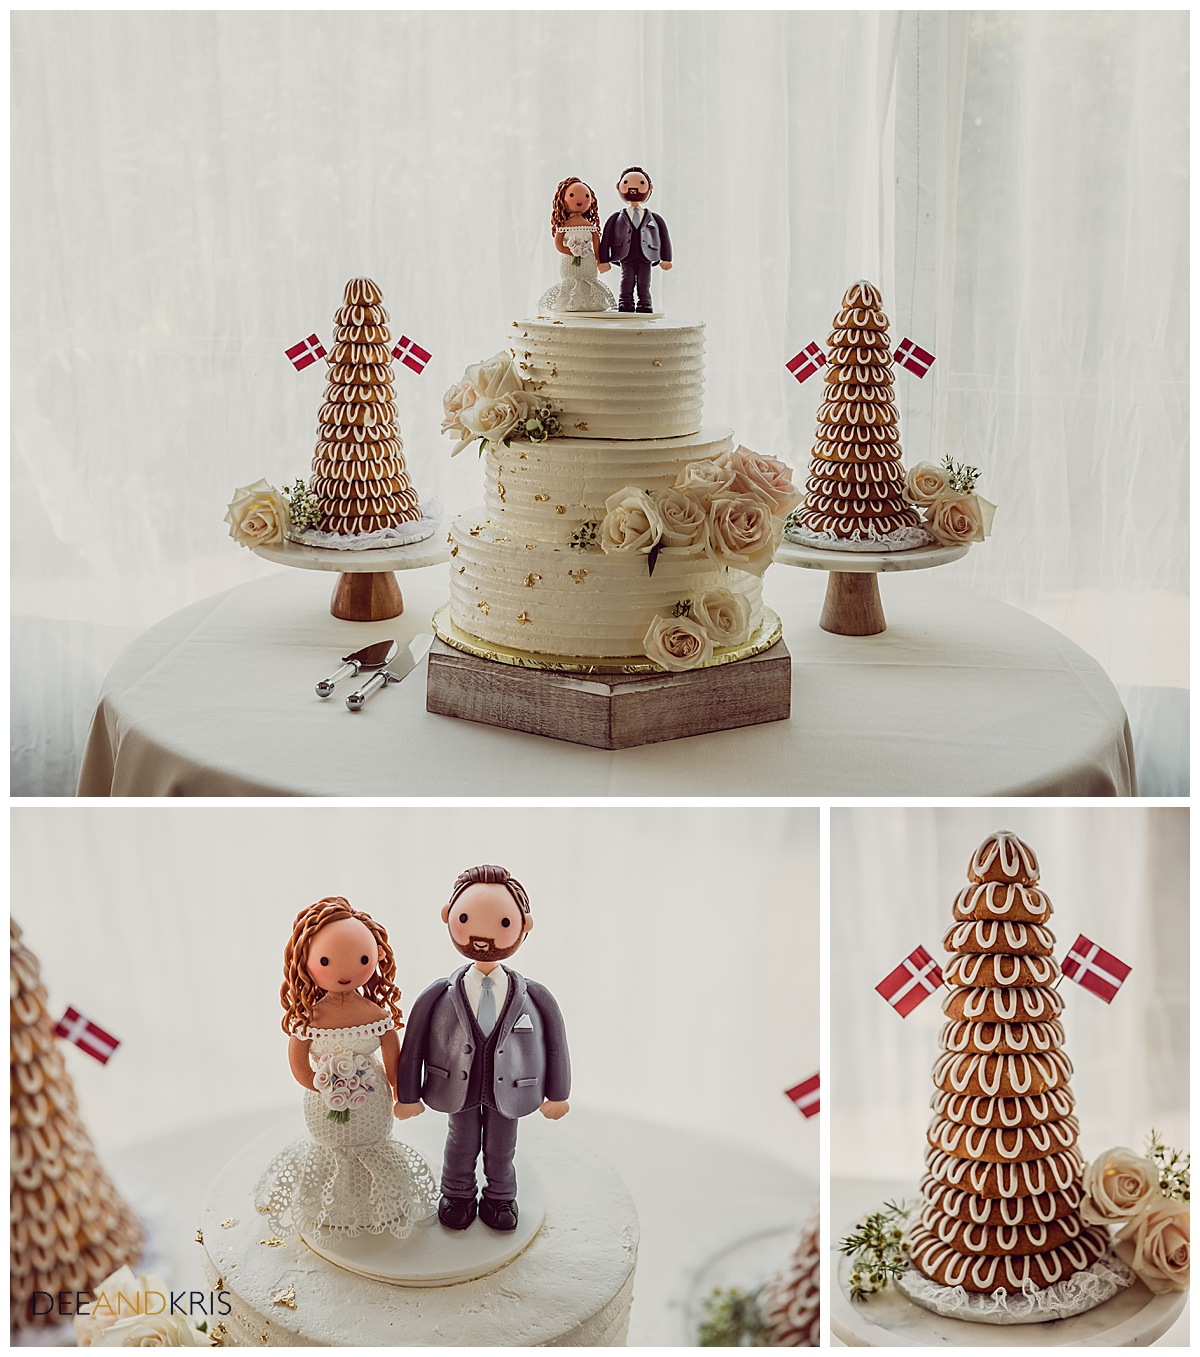 Three images of cake topper by Nhu Le. Cakes provided by venue.